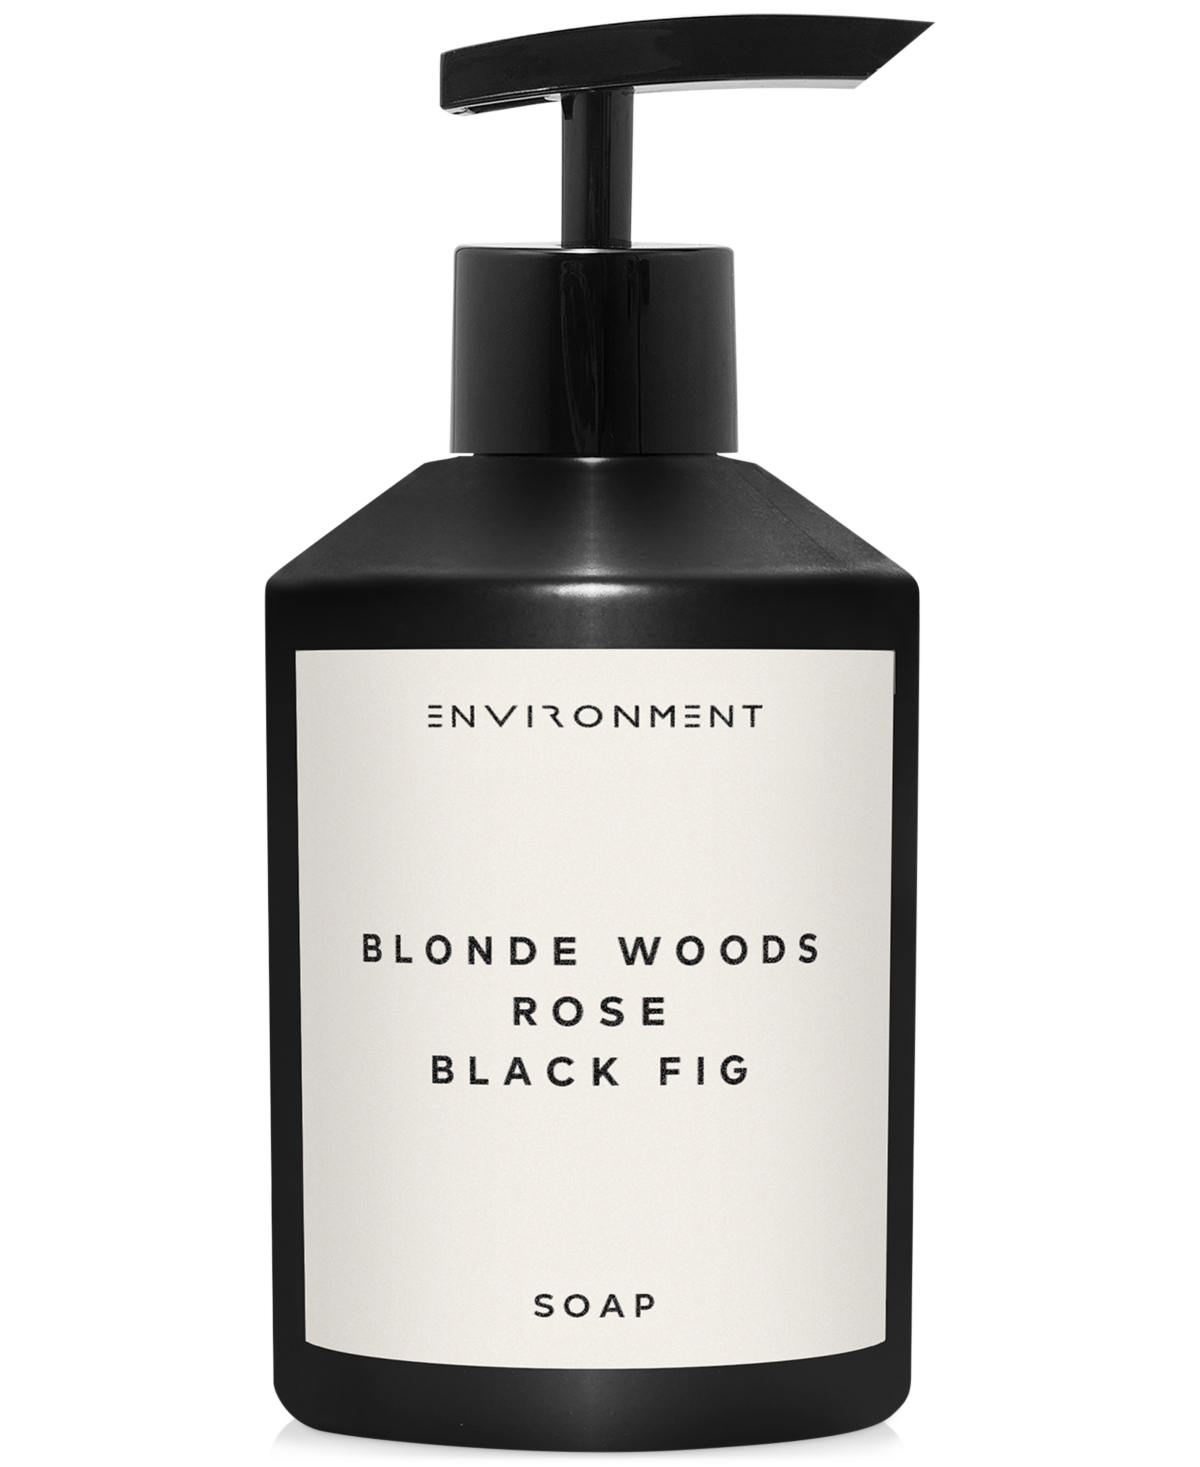 Blonde Woods, Rose & Black Fig Hand Soap (Inspired by 5-Star Luxury Hotels), 10 oz.